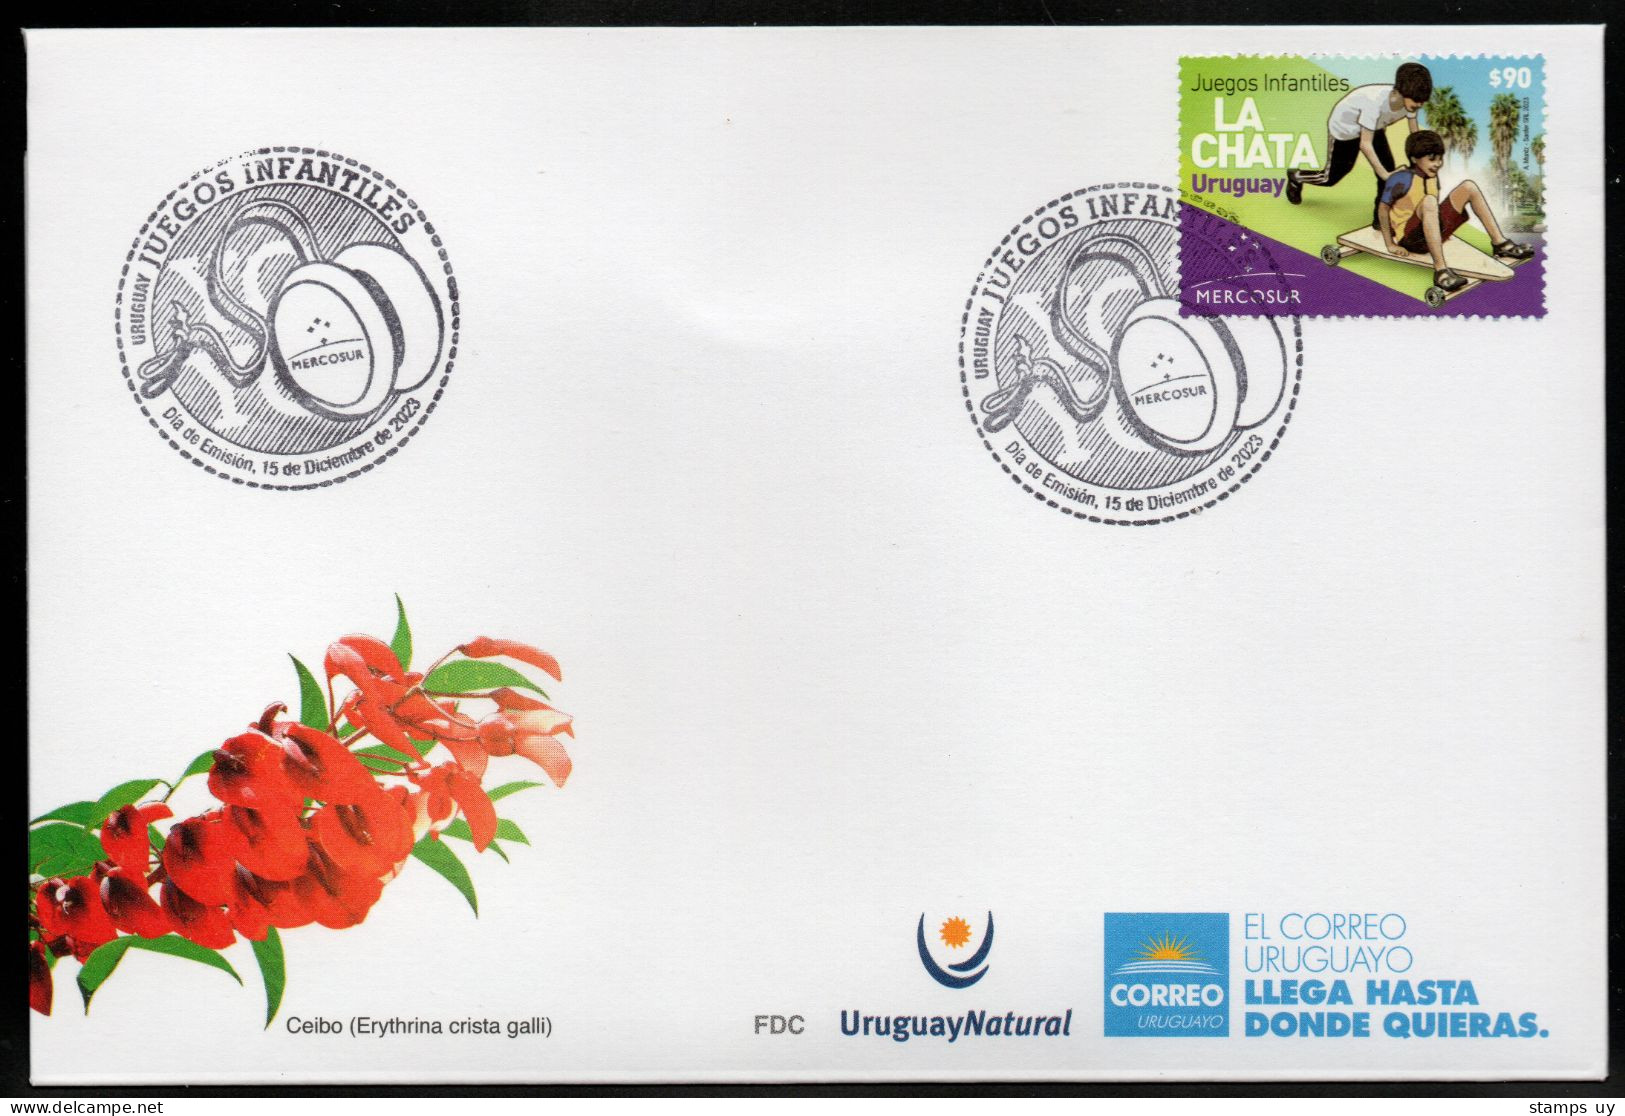 URUGUAY 2023 (Joint Issue, Mercosur, Games, Children, Toys, Wooden Cart, YoYo, Ruleman, Palm, Tree, Crux, Stars) - 1 FDC - Non Classificati